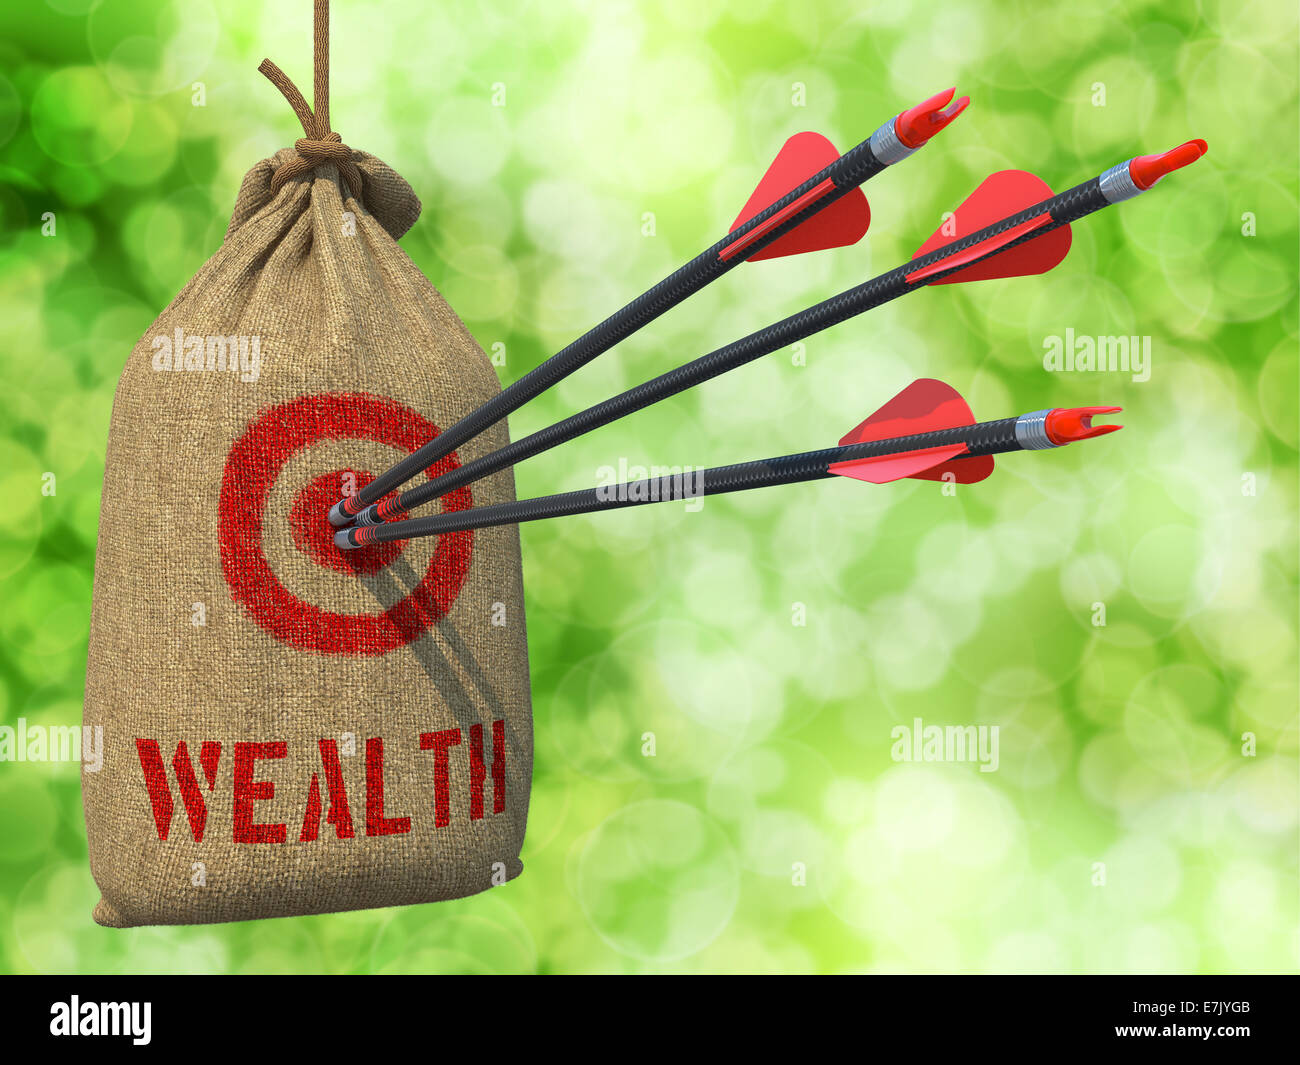 Wealth - Arrows Hit in Red Mark Target. Stock Photo